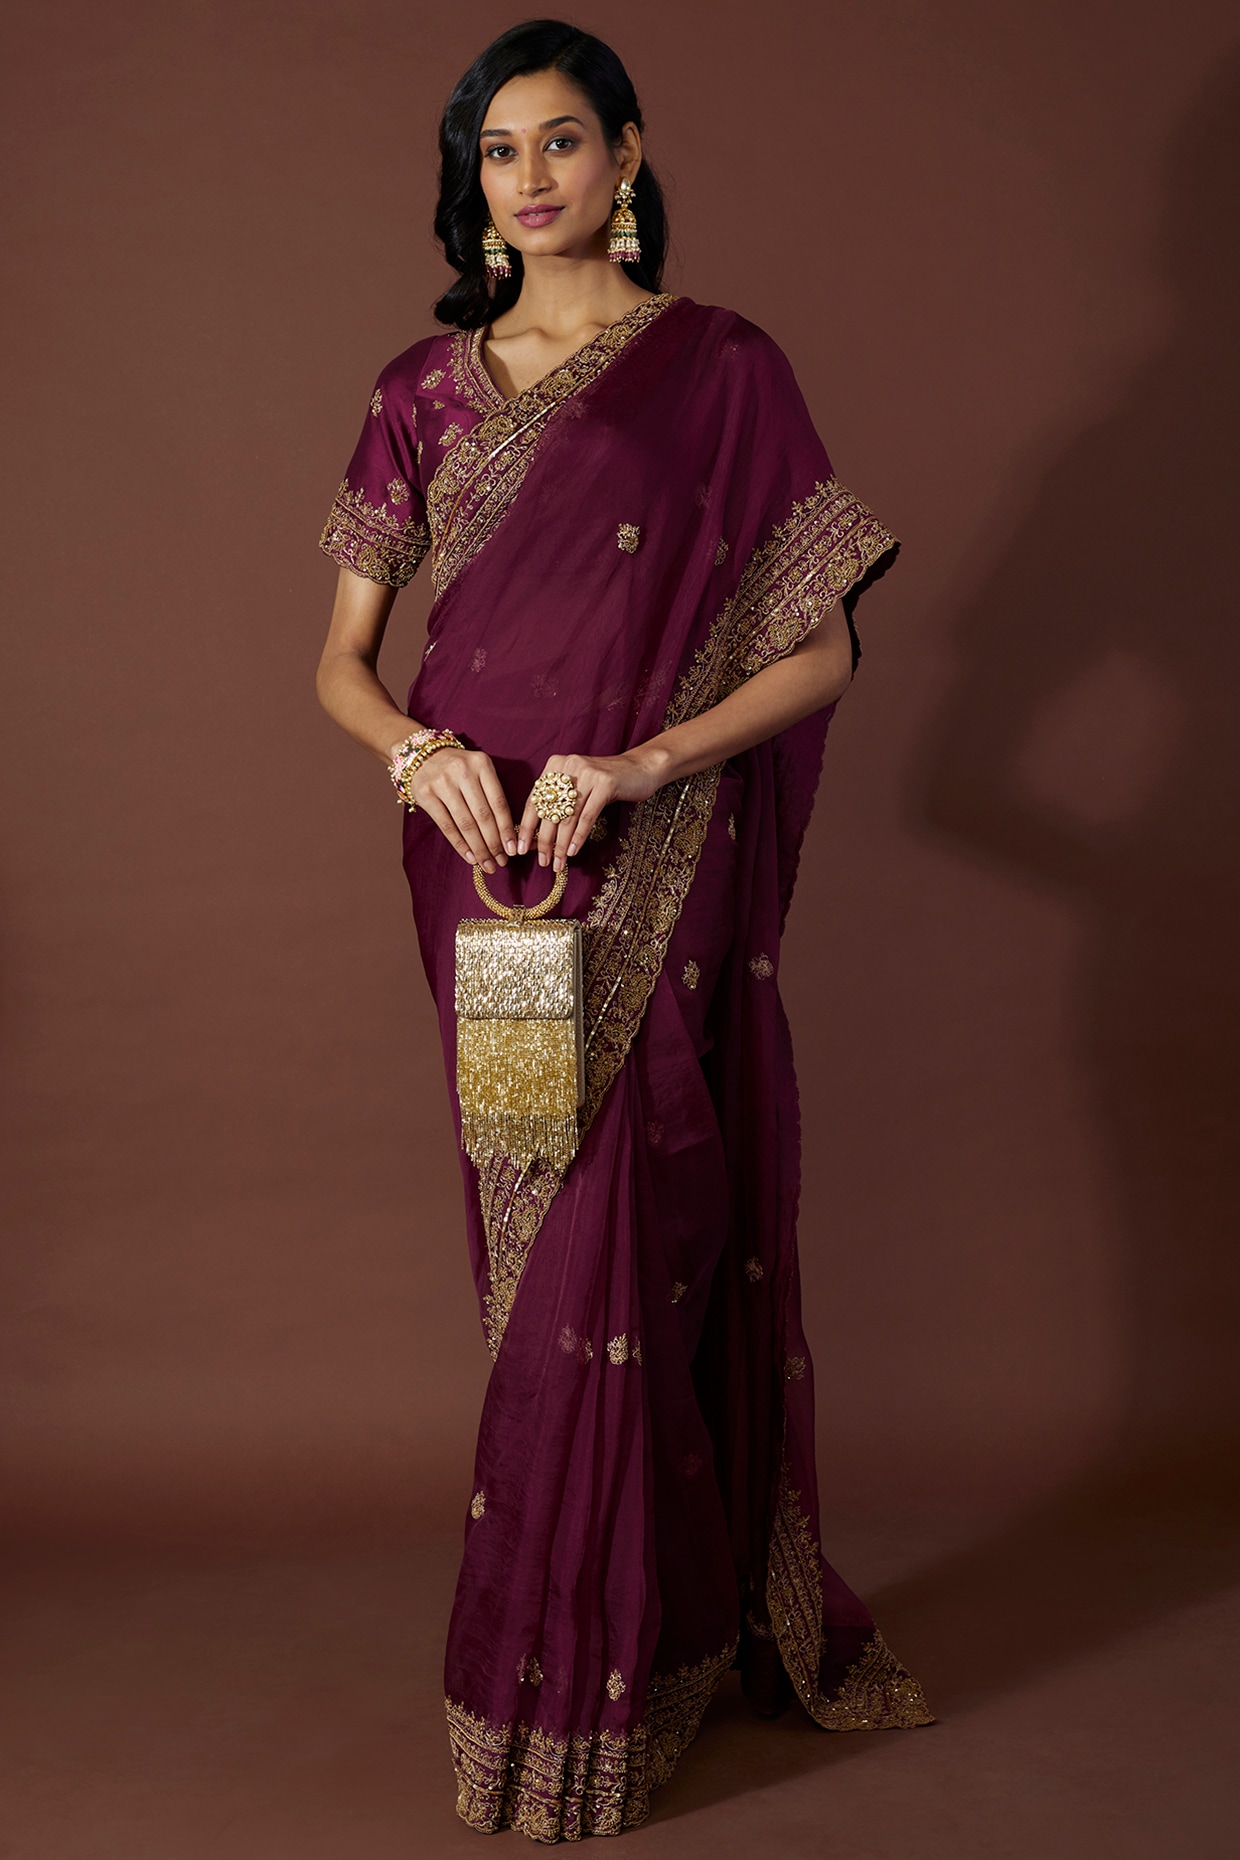 Dohr | Maroon organza gold foil printed saree with blouse | Aaina – Dohr  India